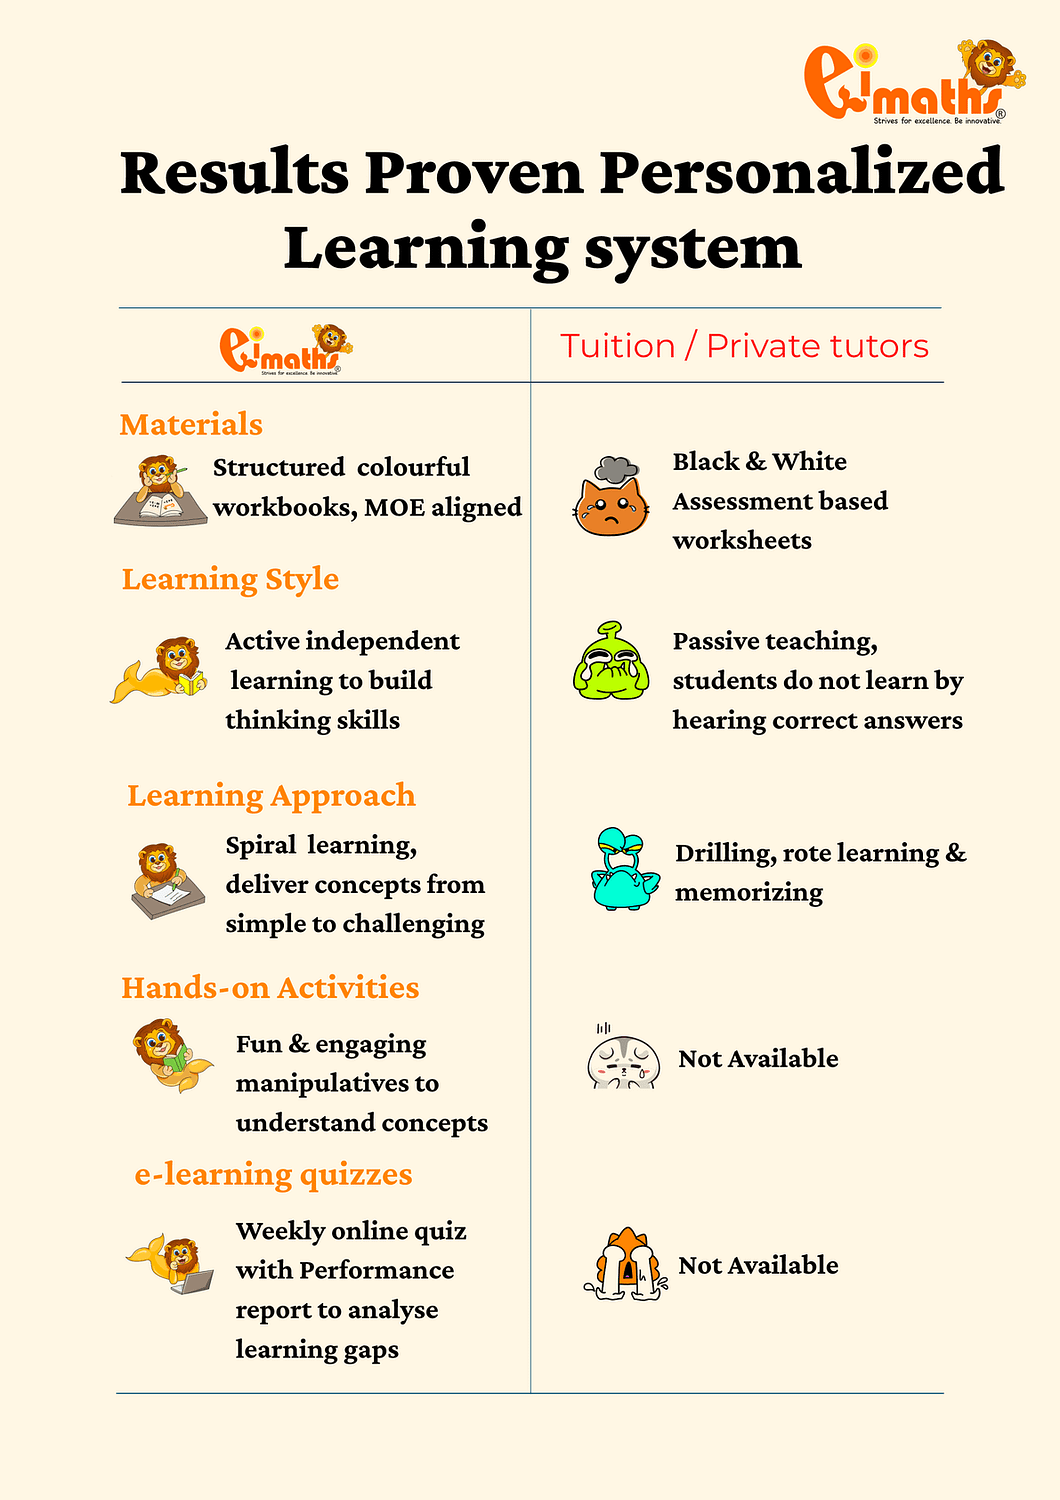 Personalized Learning System